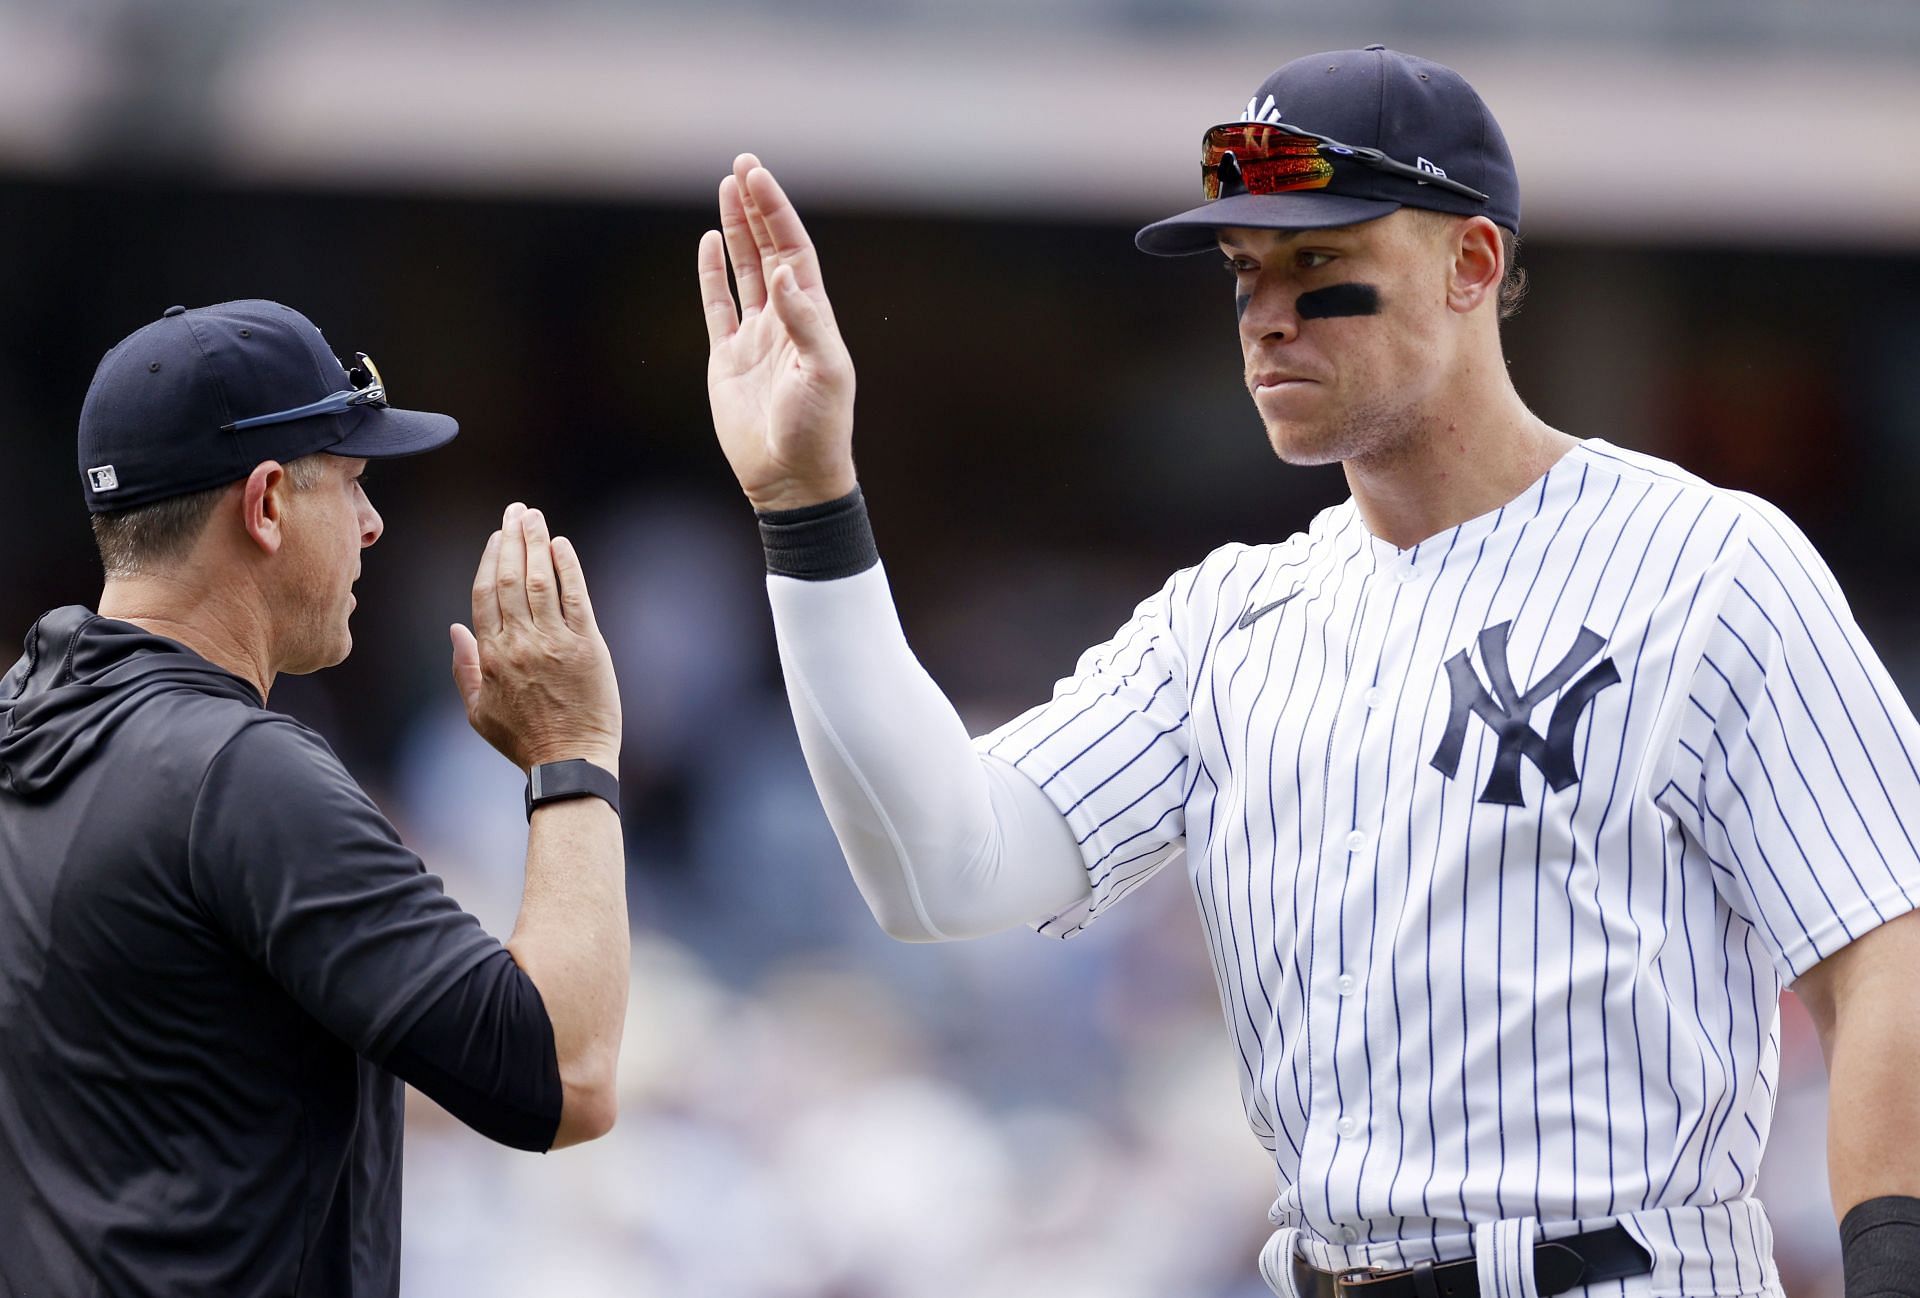 Aaron Judge says Aaron Boone is 'the guy' to be Yankees manager